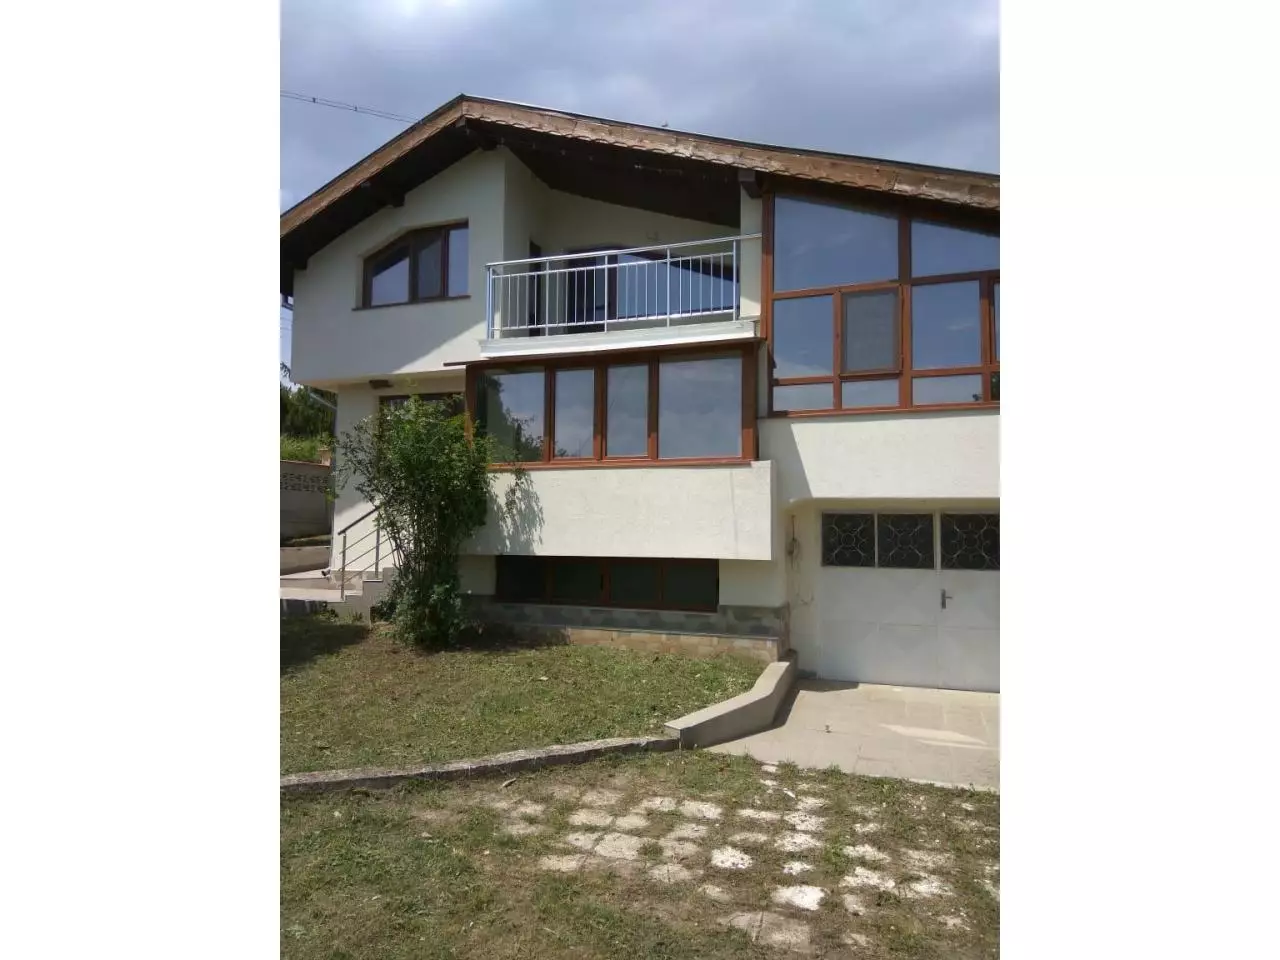 For sale a new house with an area of 370 sq.m. in the Bulgarian - 1/12